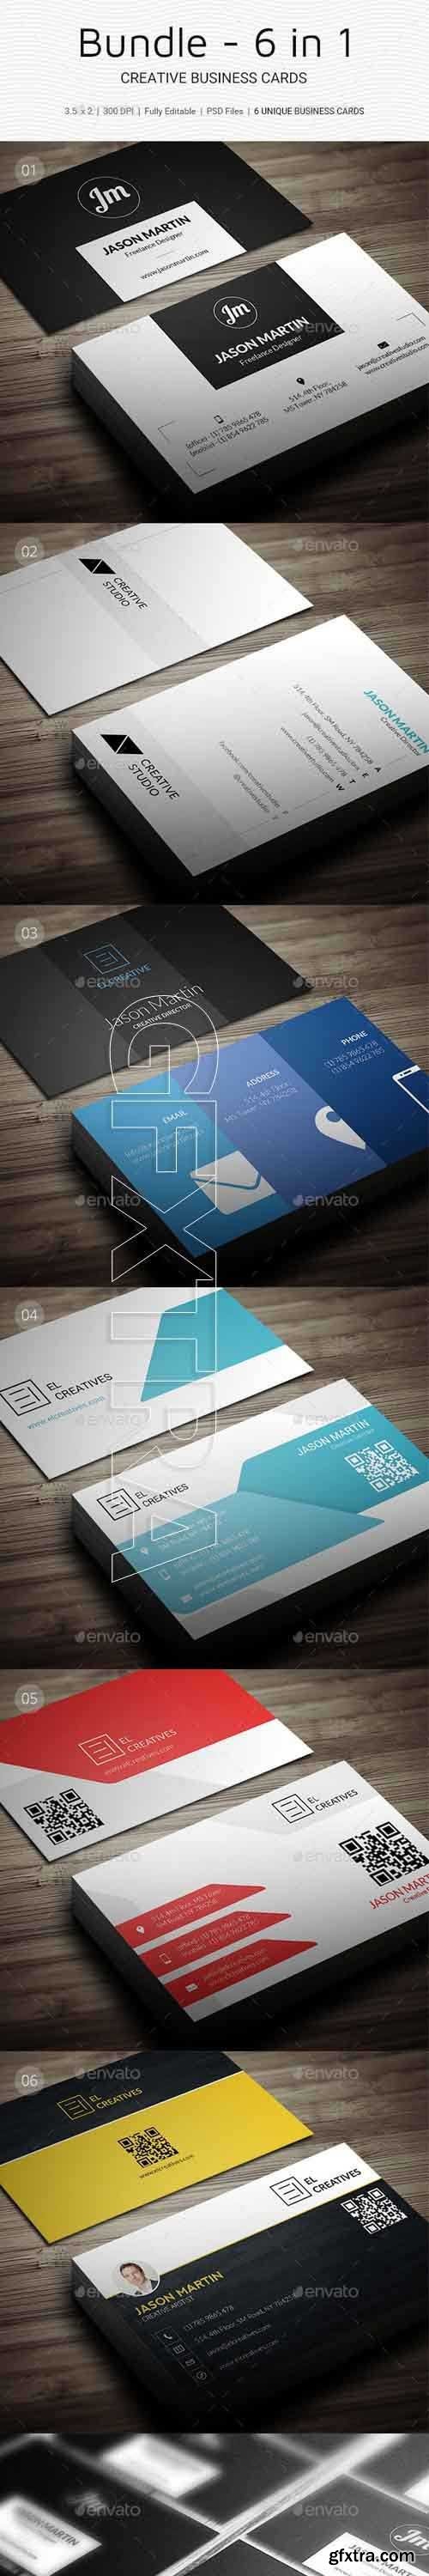 GraphicRiver - Bundle - 6 in 1 - Pro Minimal Business Cards - B36 20501705